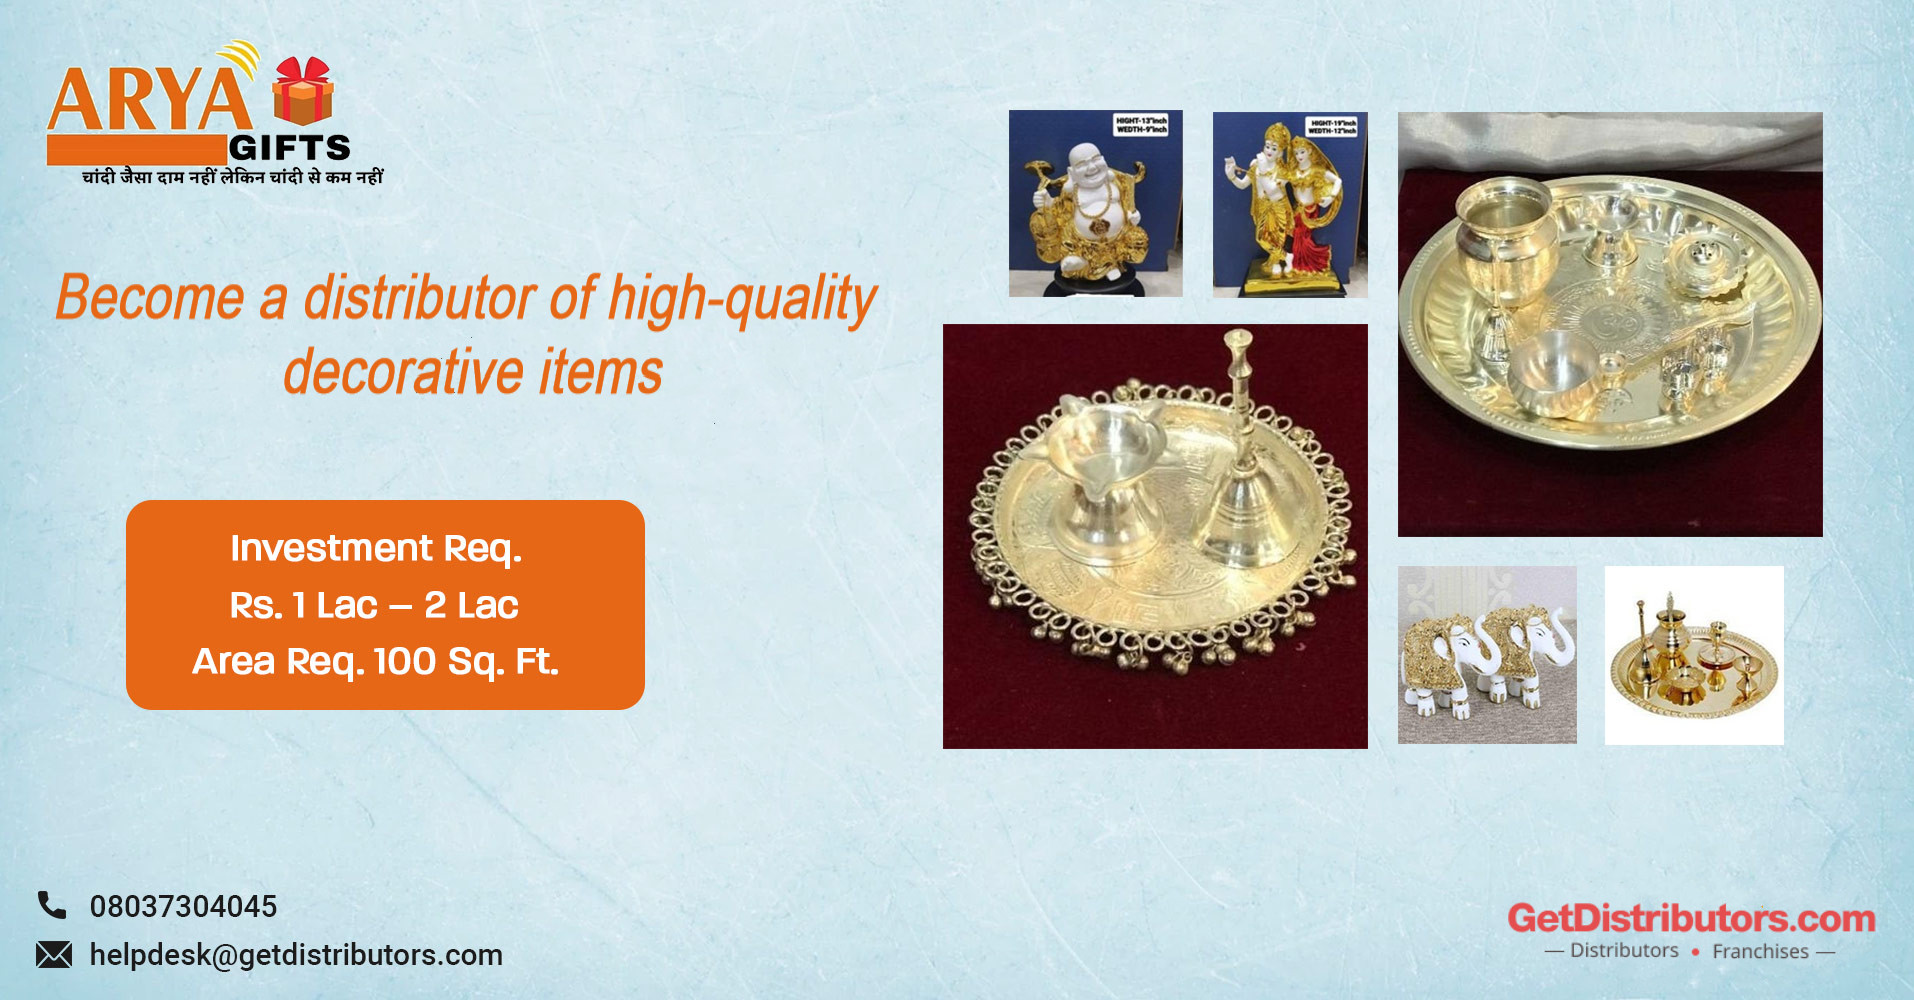 Become a distributor of high-quality decorative items